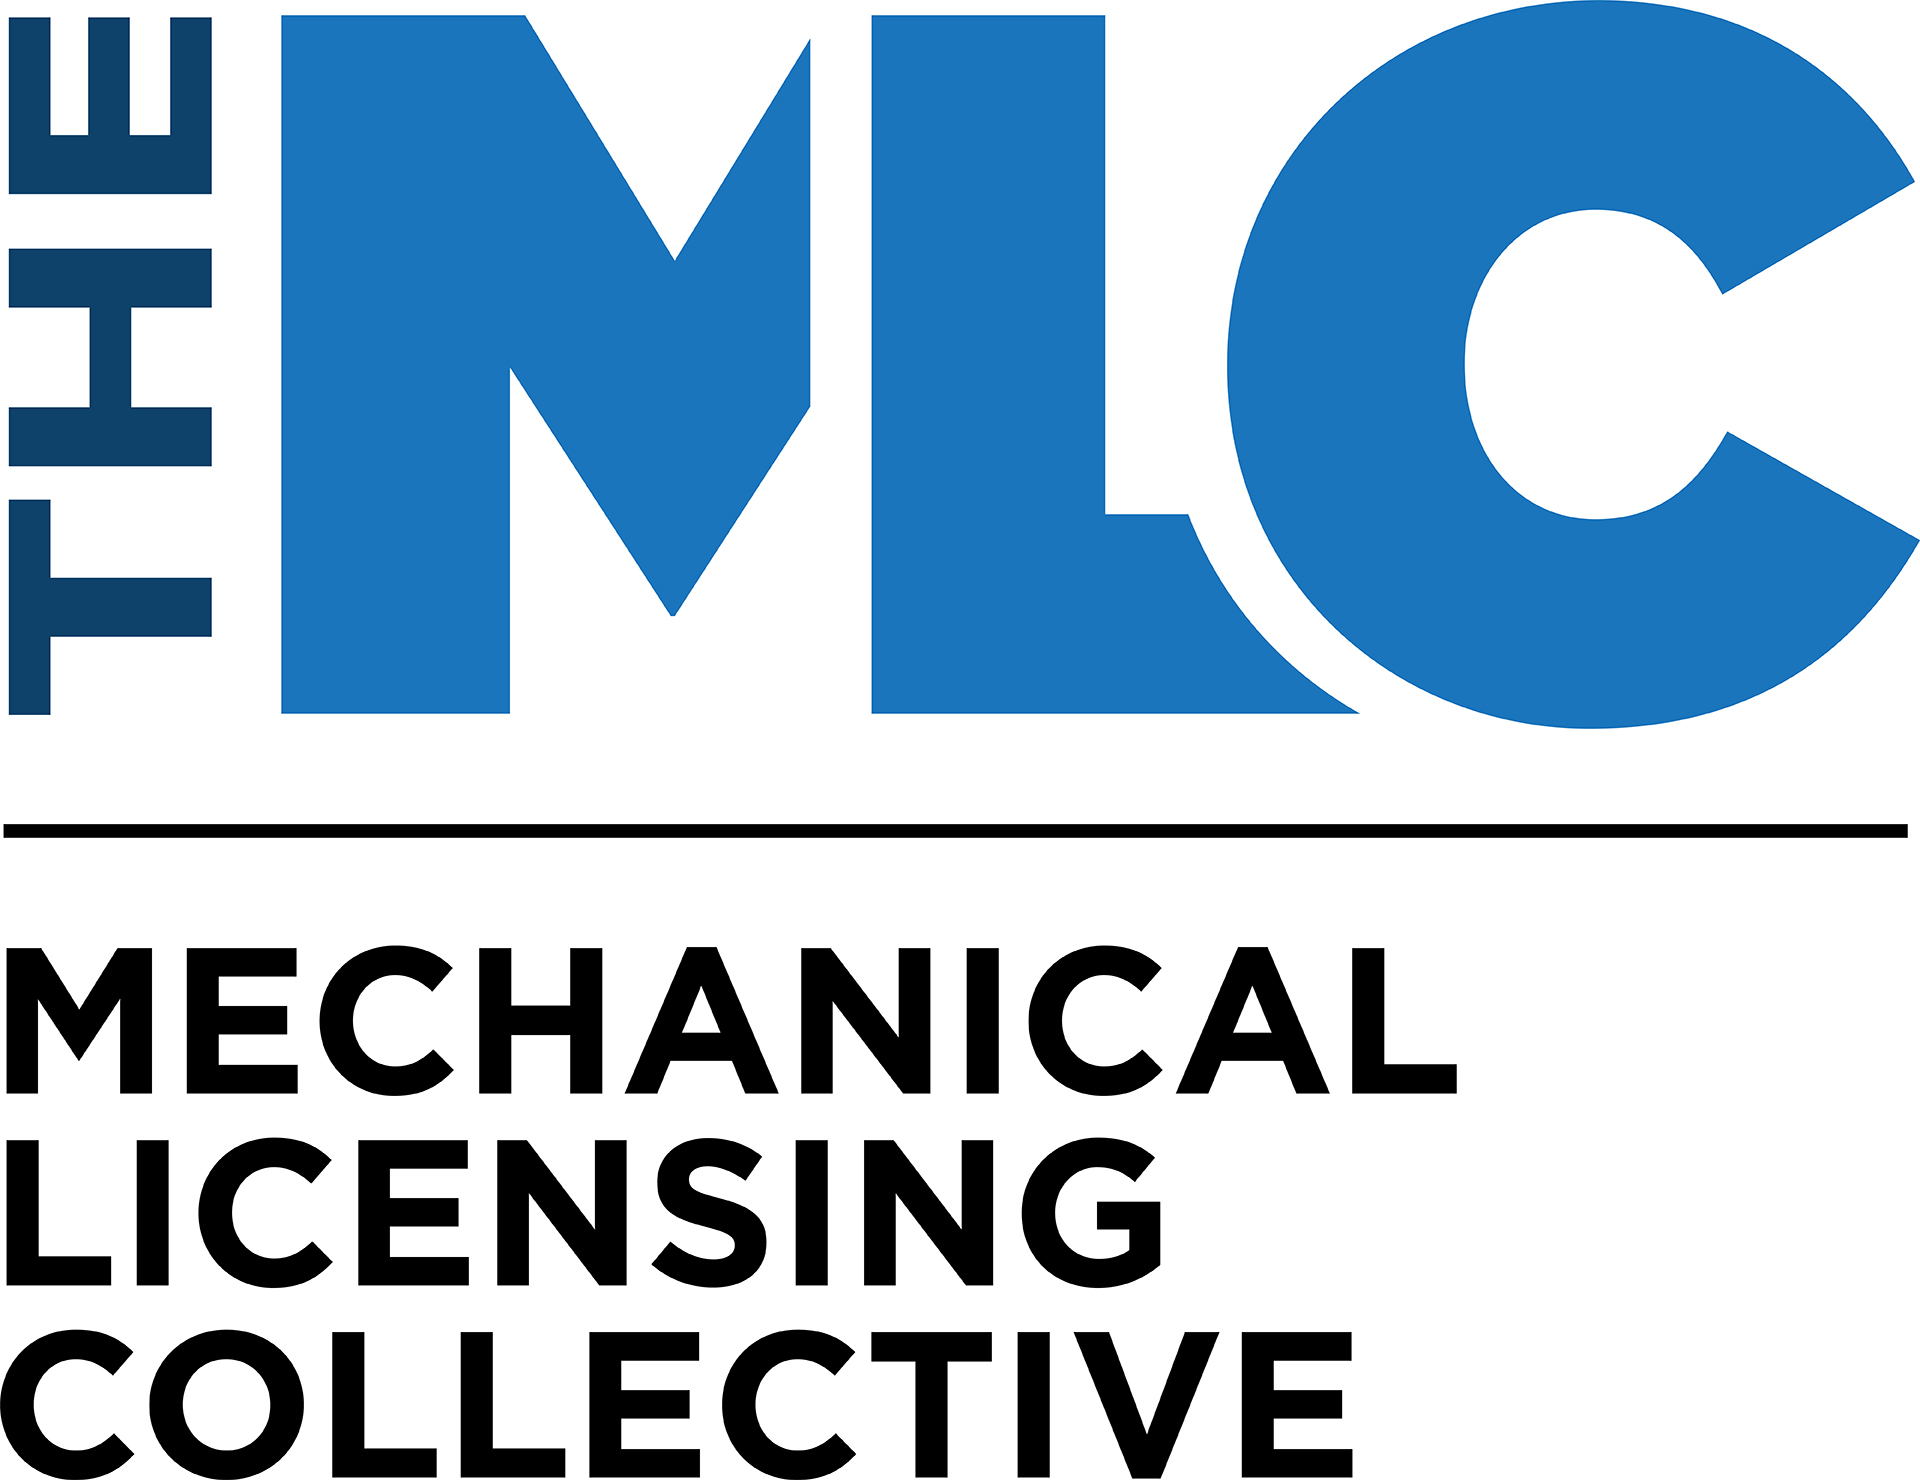 The MLC has launched: Mechanical Licensing Collective for music streaming in the US